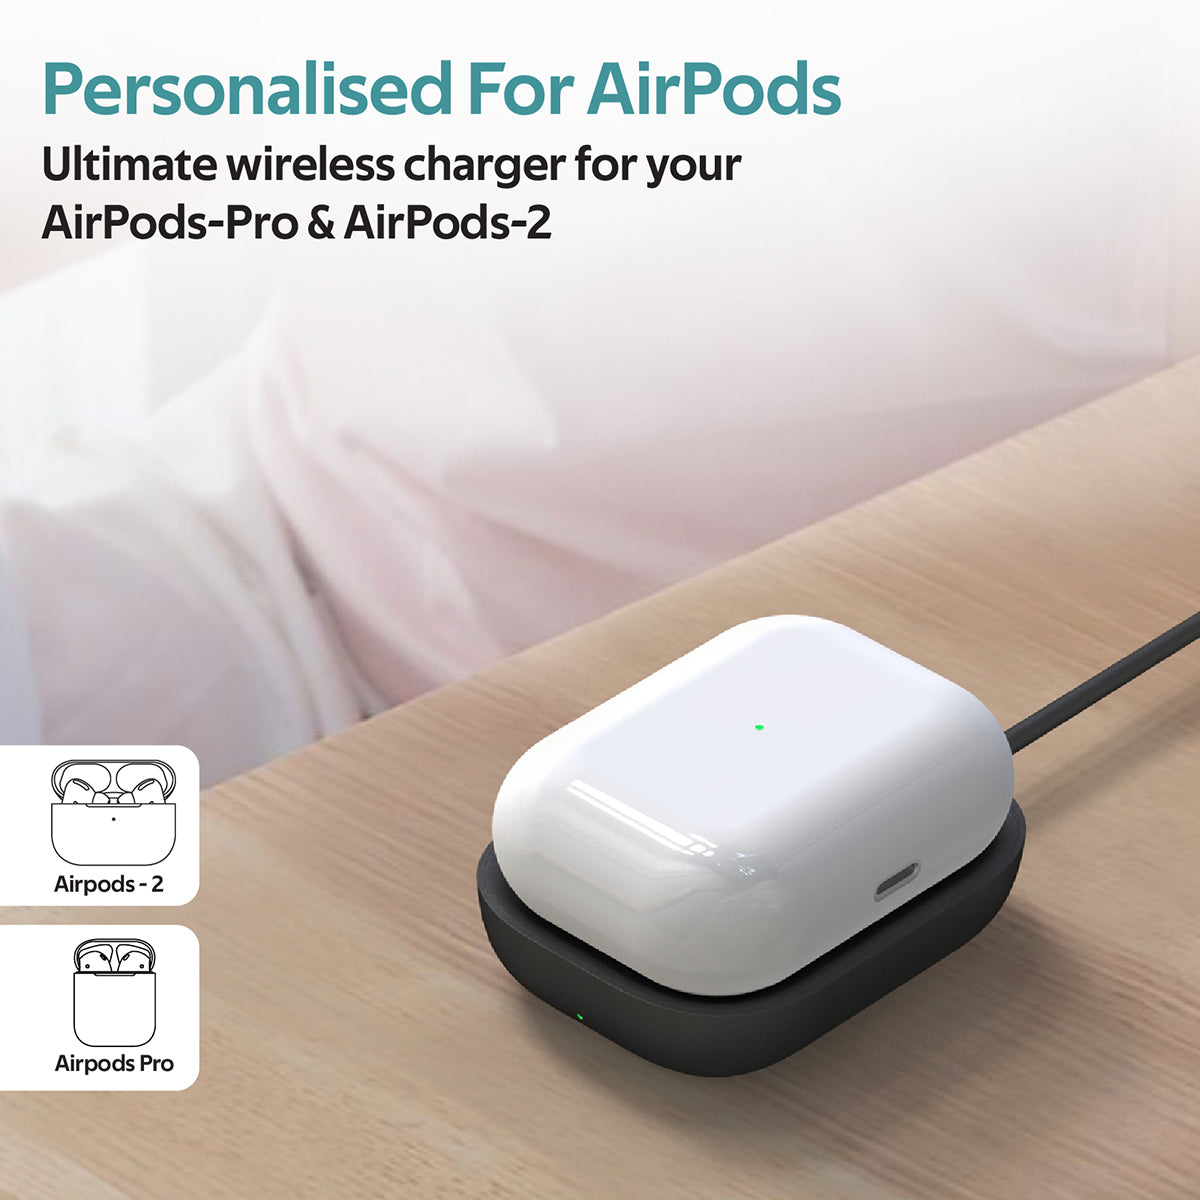 Promate - Wireless Charger for AirPods, Powerful 5W Wireless Charging Dock with Anti-Slip Surface Design and Over-Charging Protection for AirPods and AirPods Pro, AuraPod-1 Black